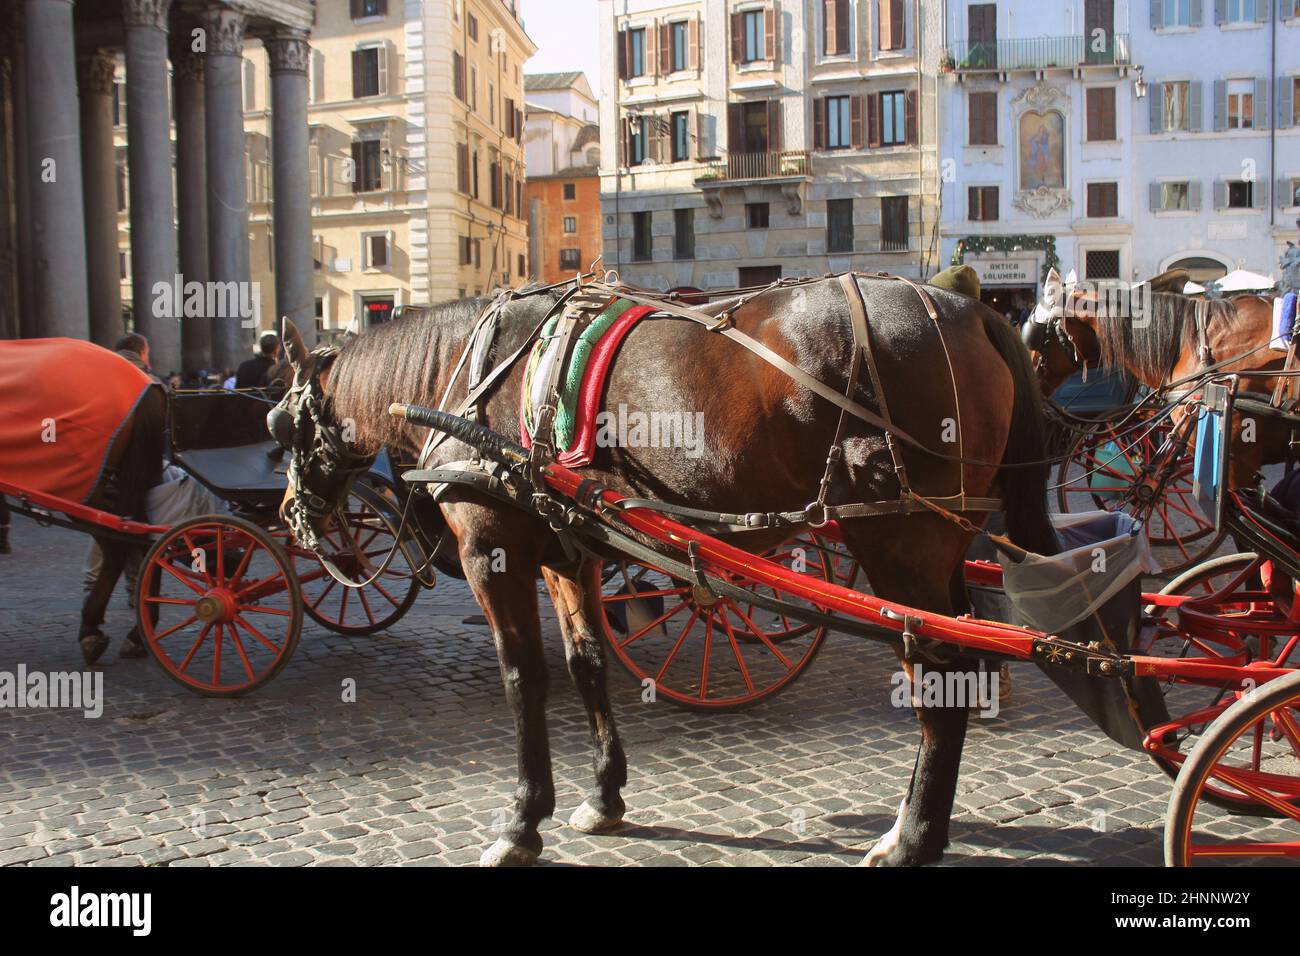 Rome, Italy - December 28, 2018 : Horse carriage for tourists at the Pantheon temple in Rome, Italy Stock Photo